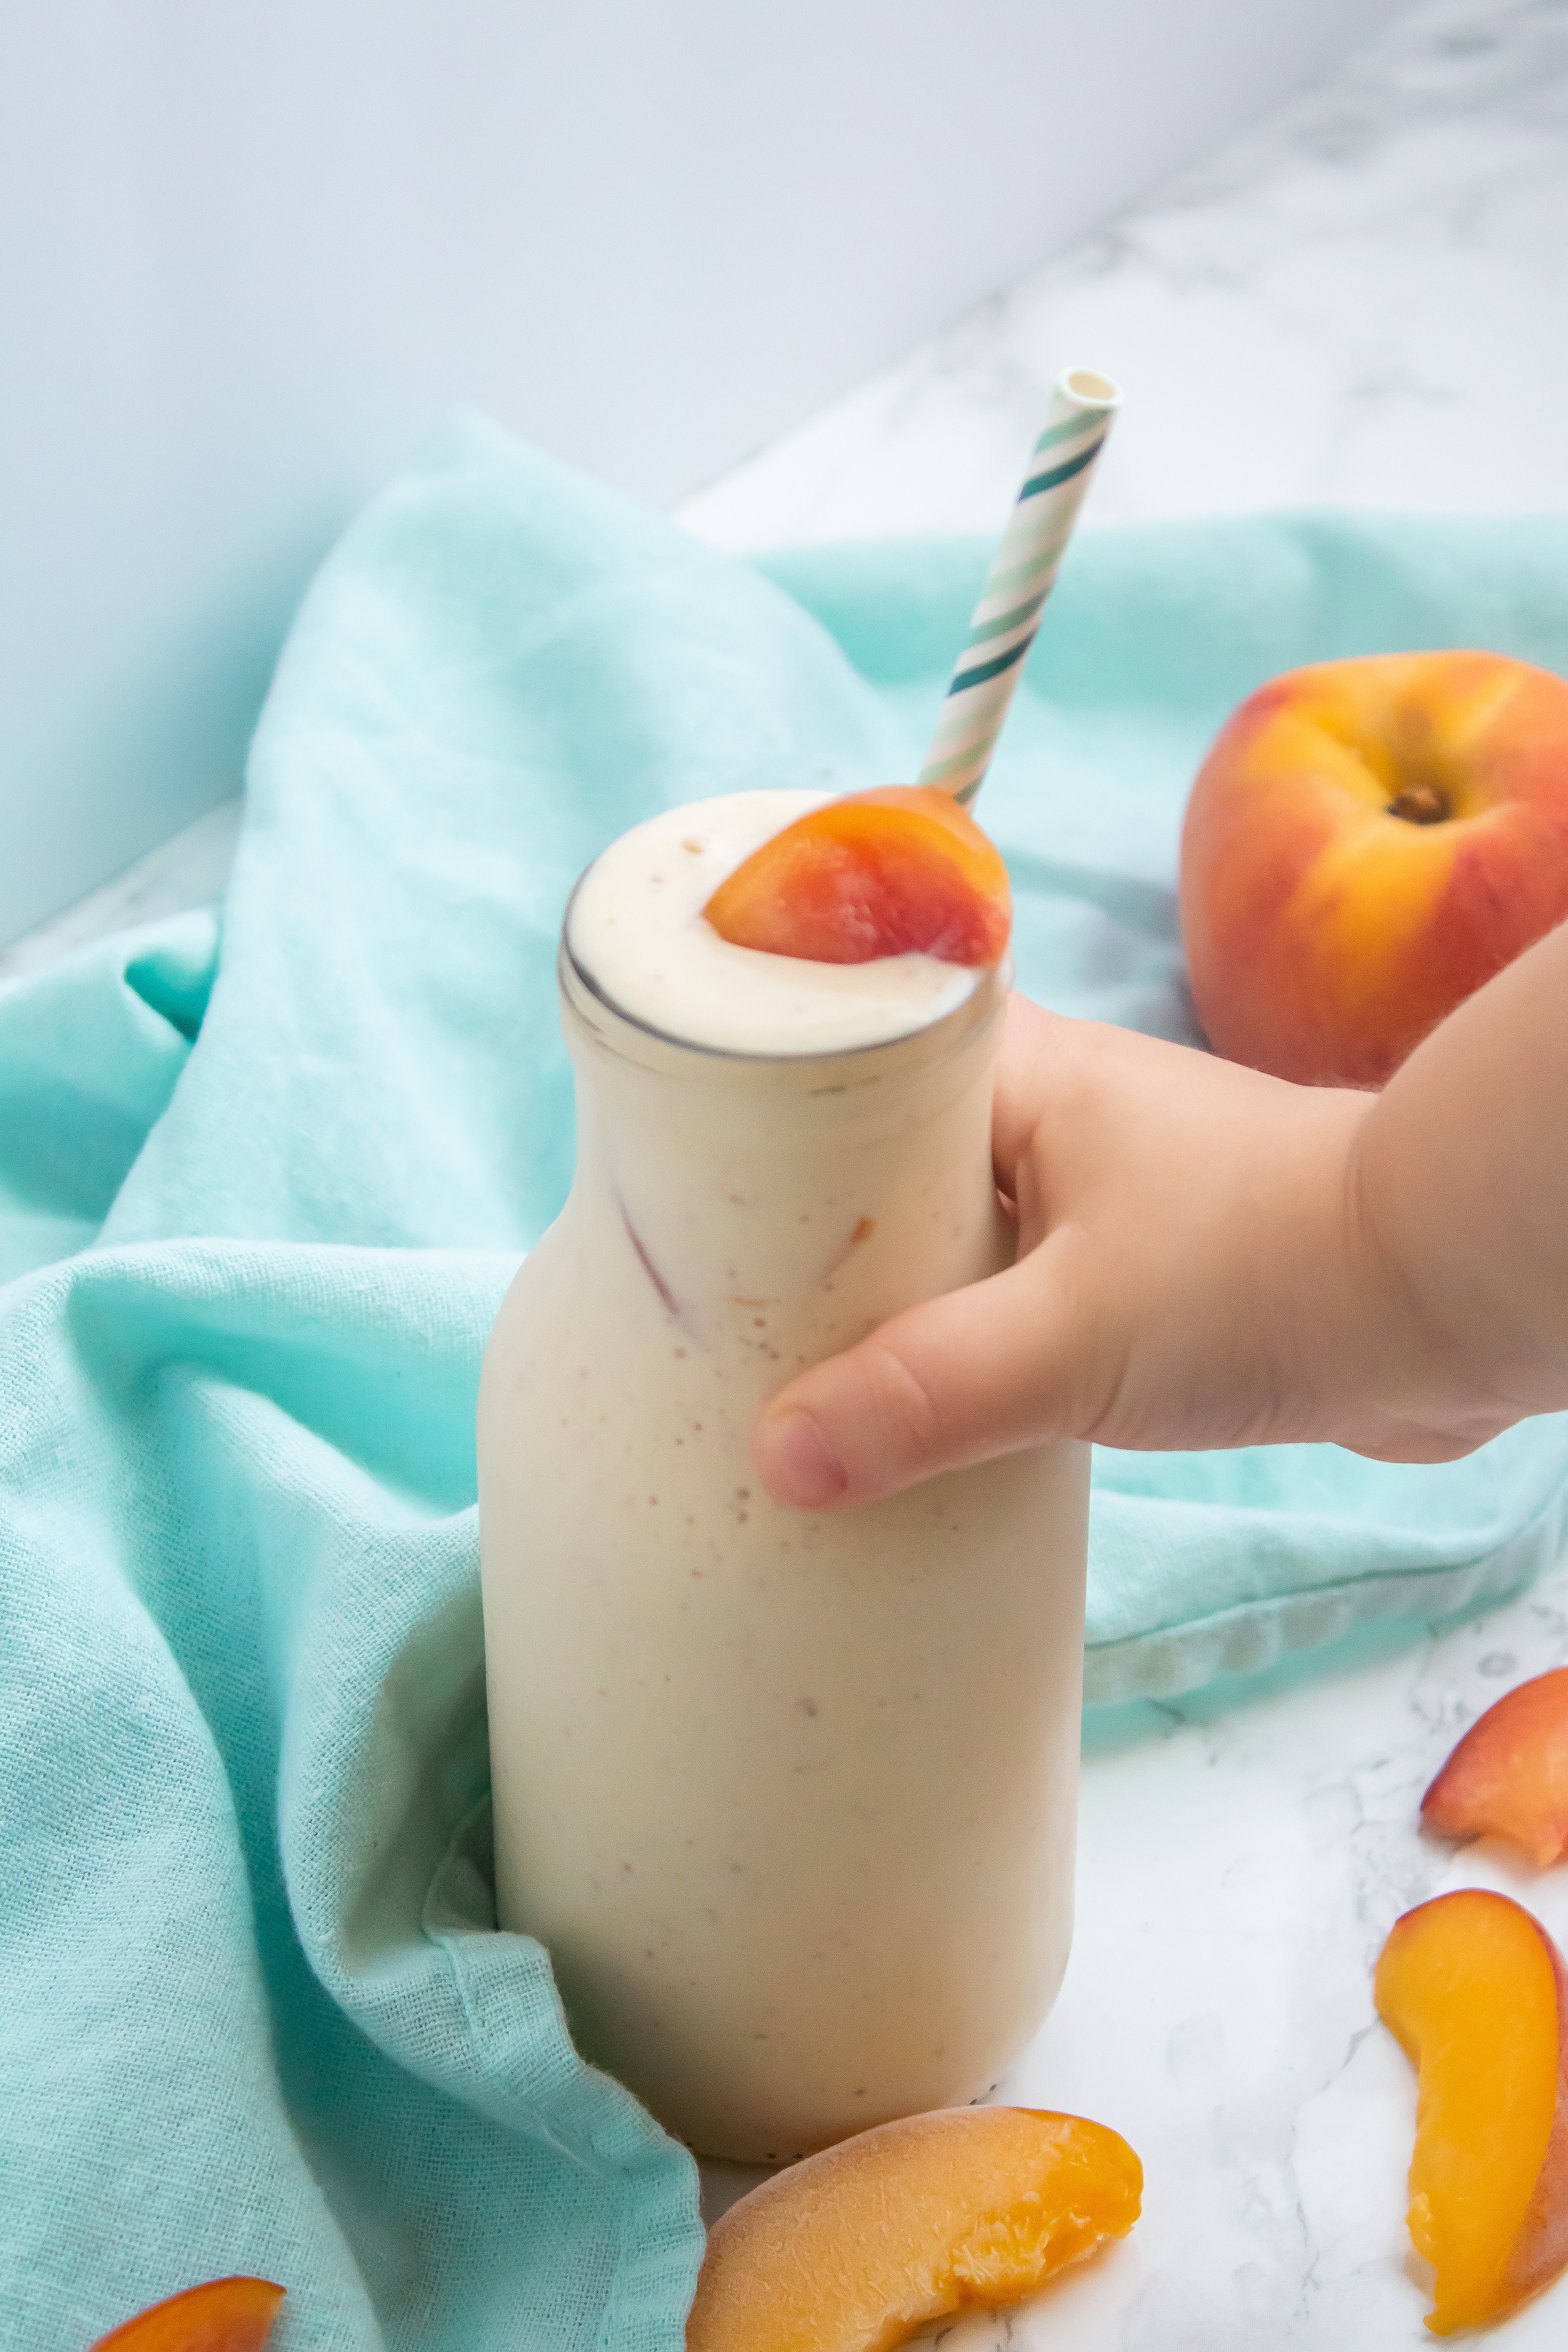 A small child's hand reaching for a glass of creamy banana peach smoothie.